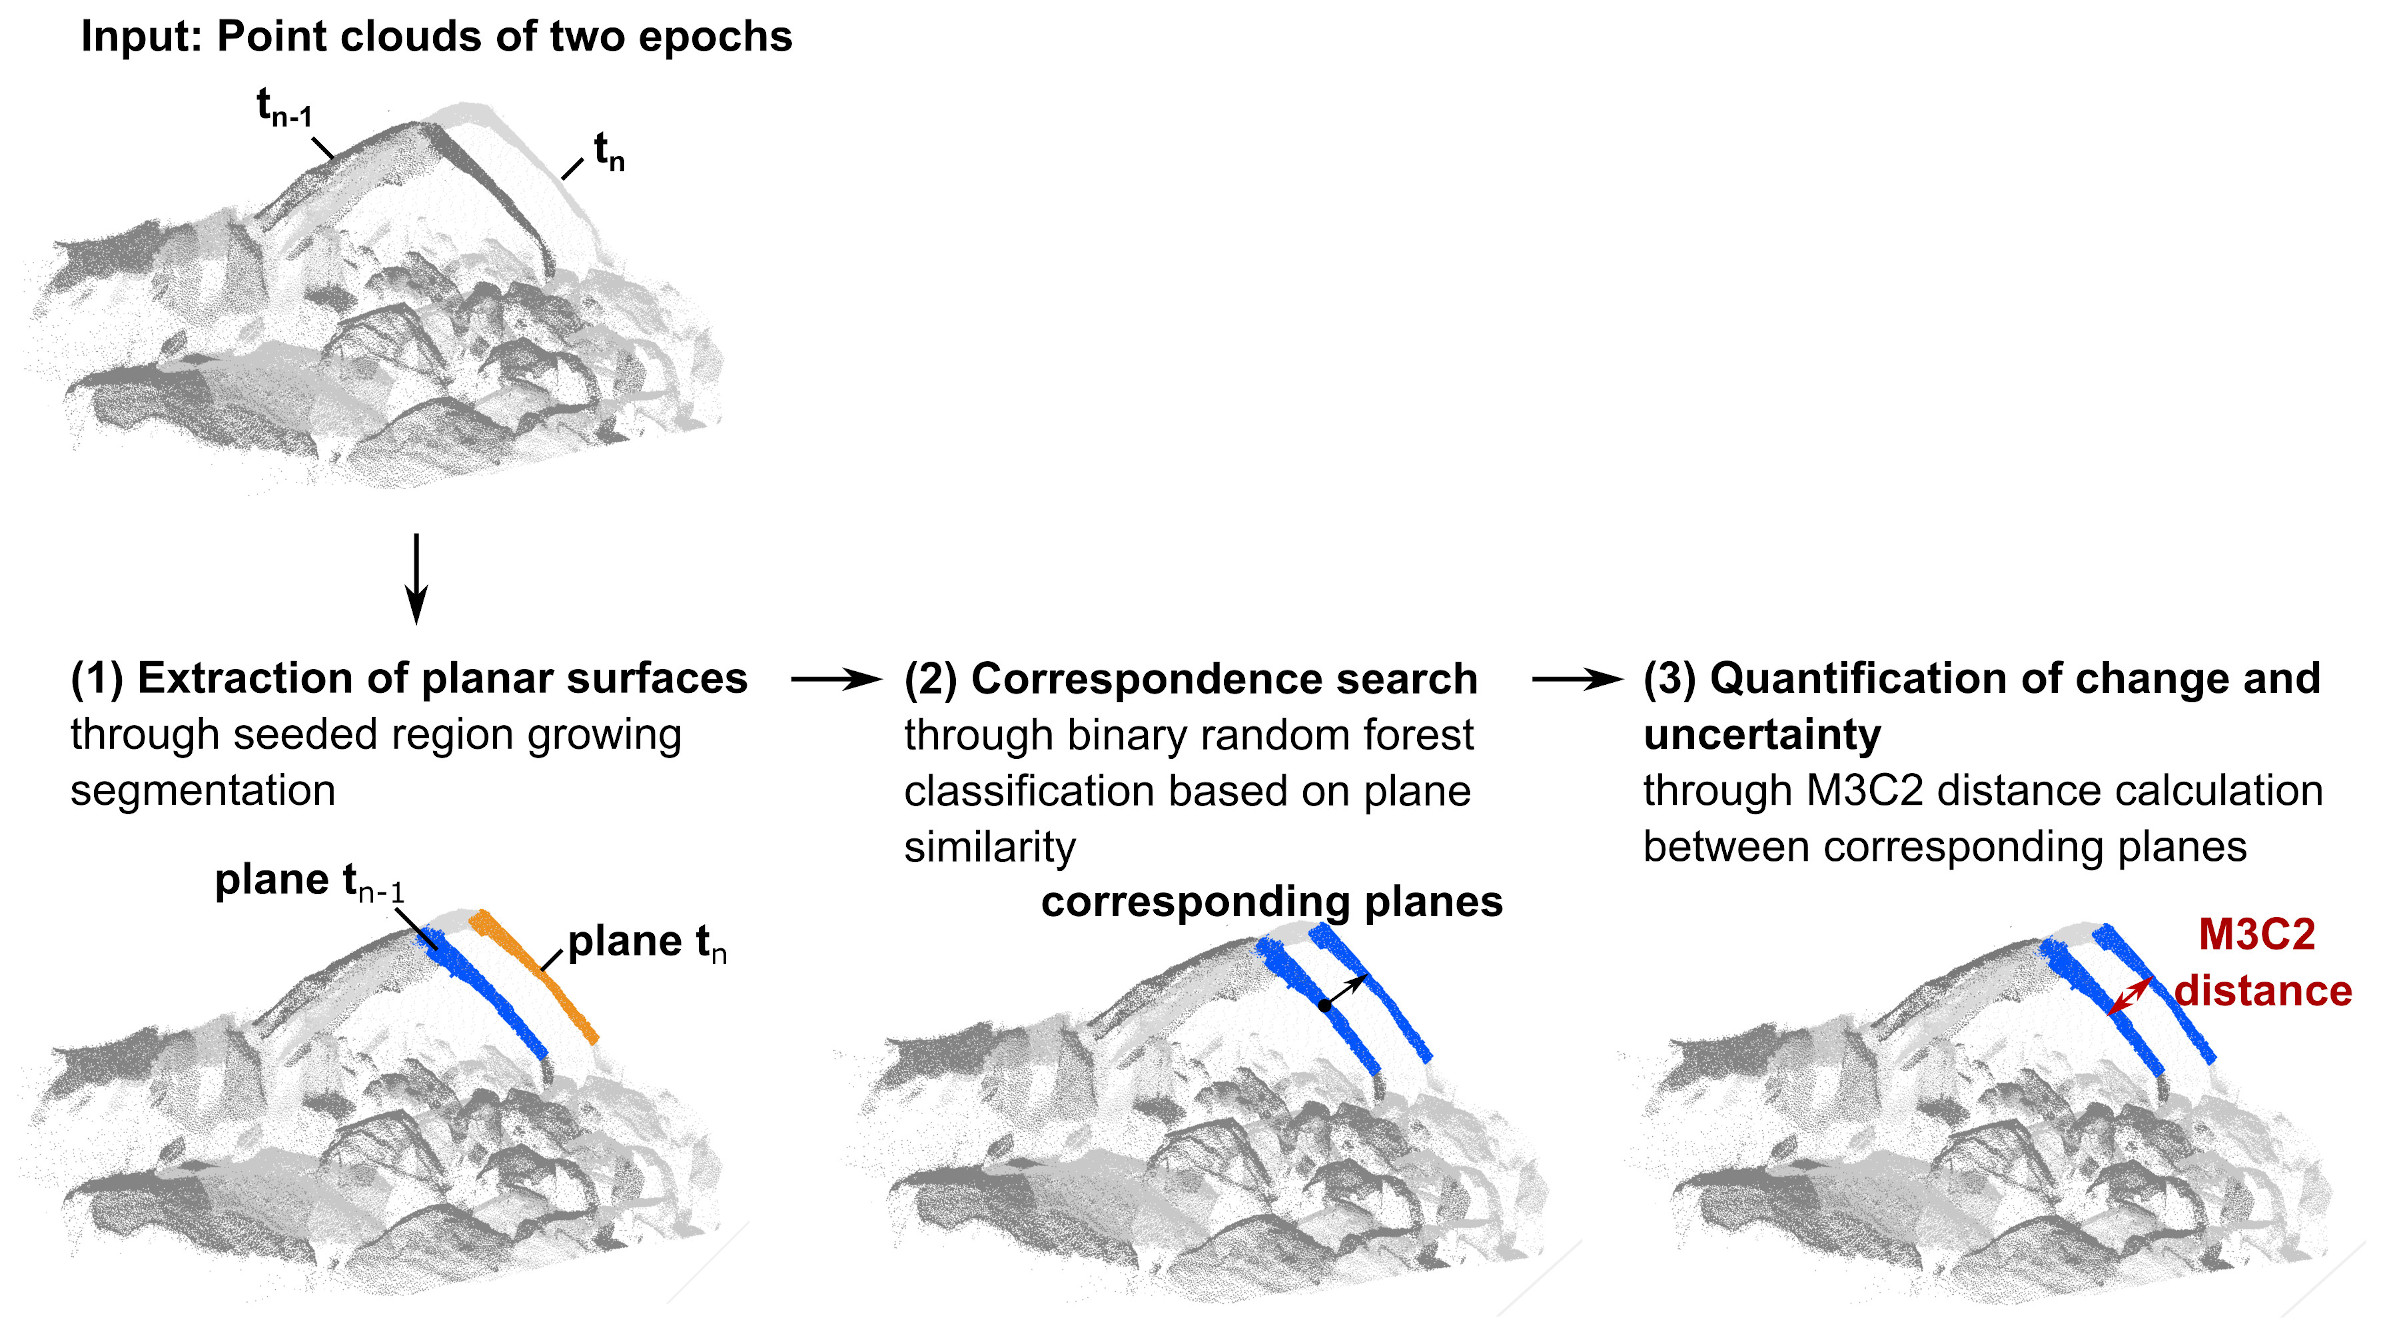 Overview of the correspondence-driven plane-based M3C2 approach to quantify change between homologous planar areas and the associated uncertainty based on point clouds of two epochs